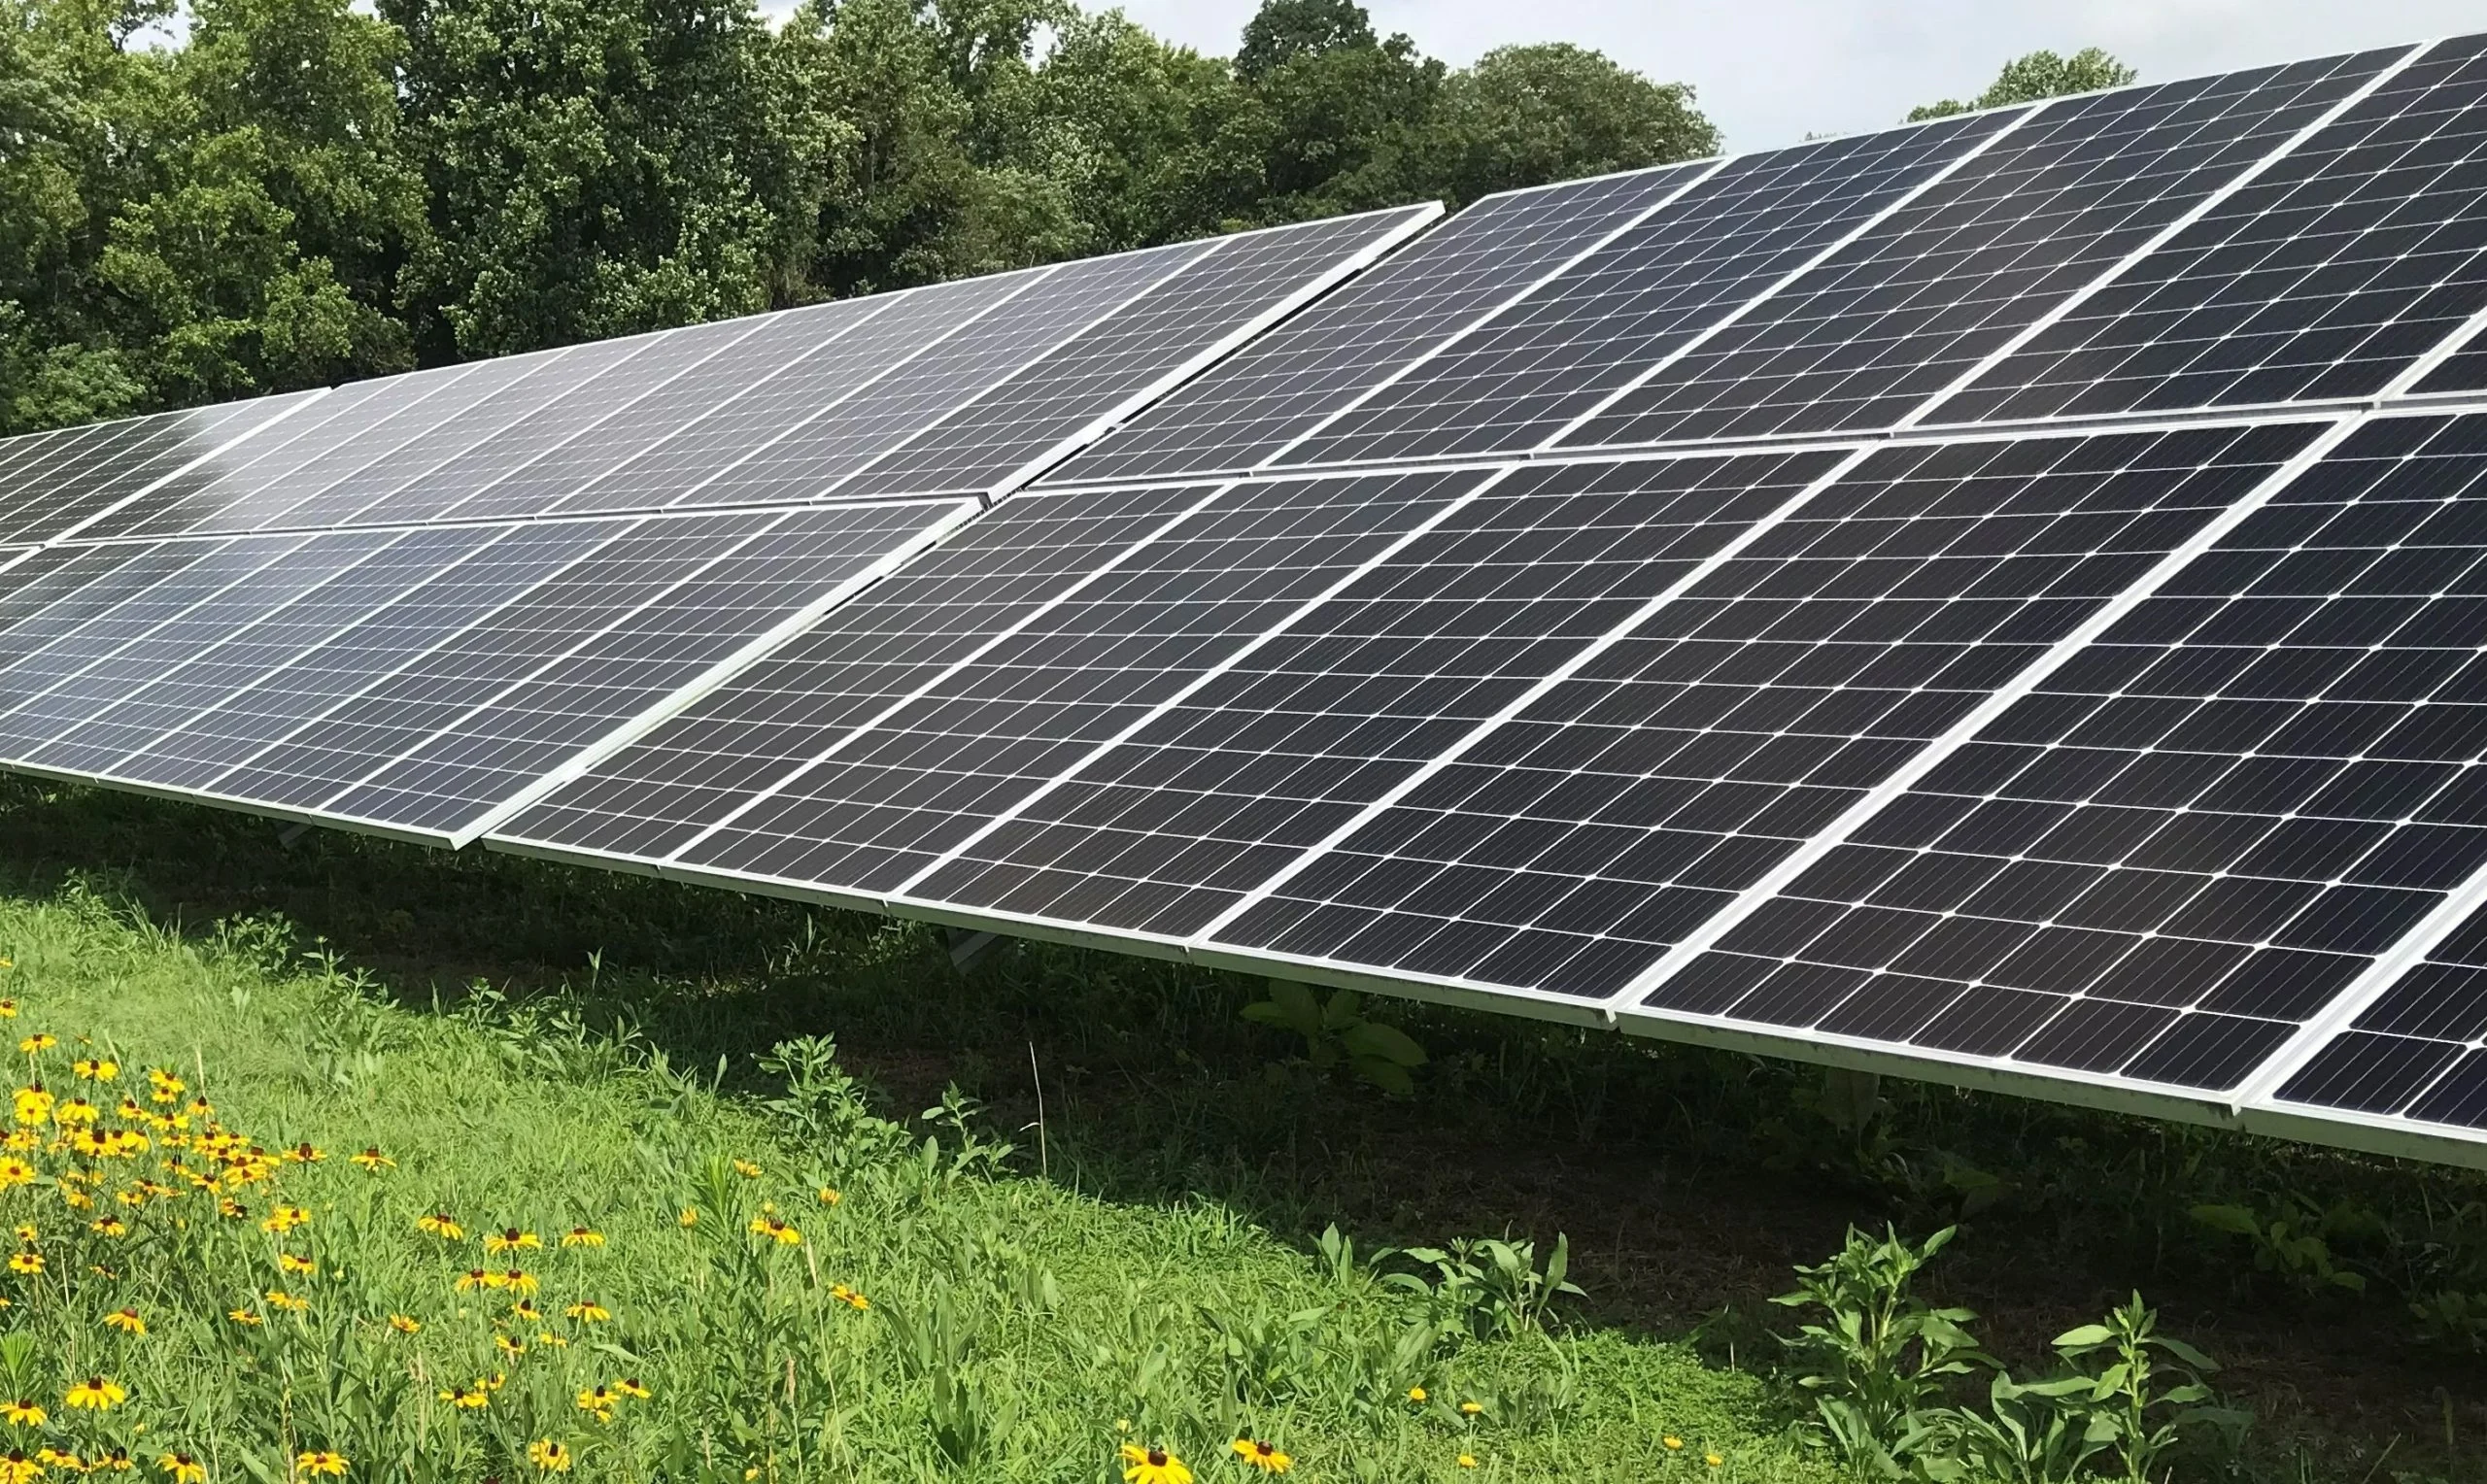 Keep It Simple, Solar: Developing Native Vegetation at Solar Energy Sites to Improve Drainage, Soil Health and Biodiversity